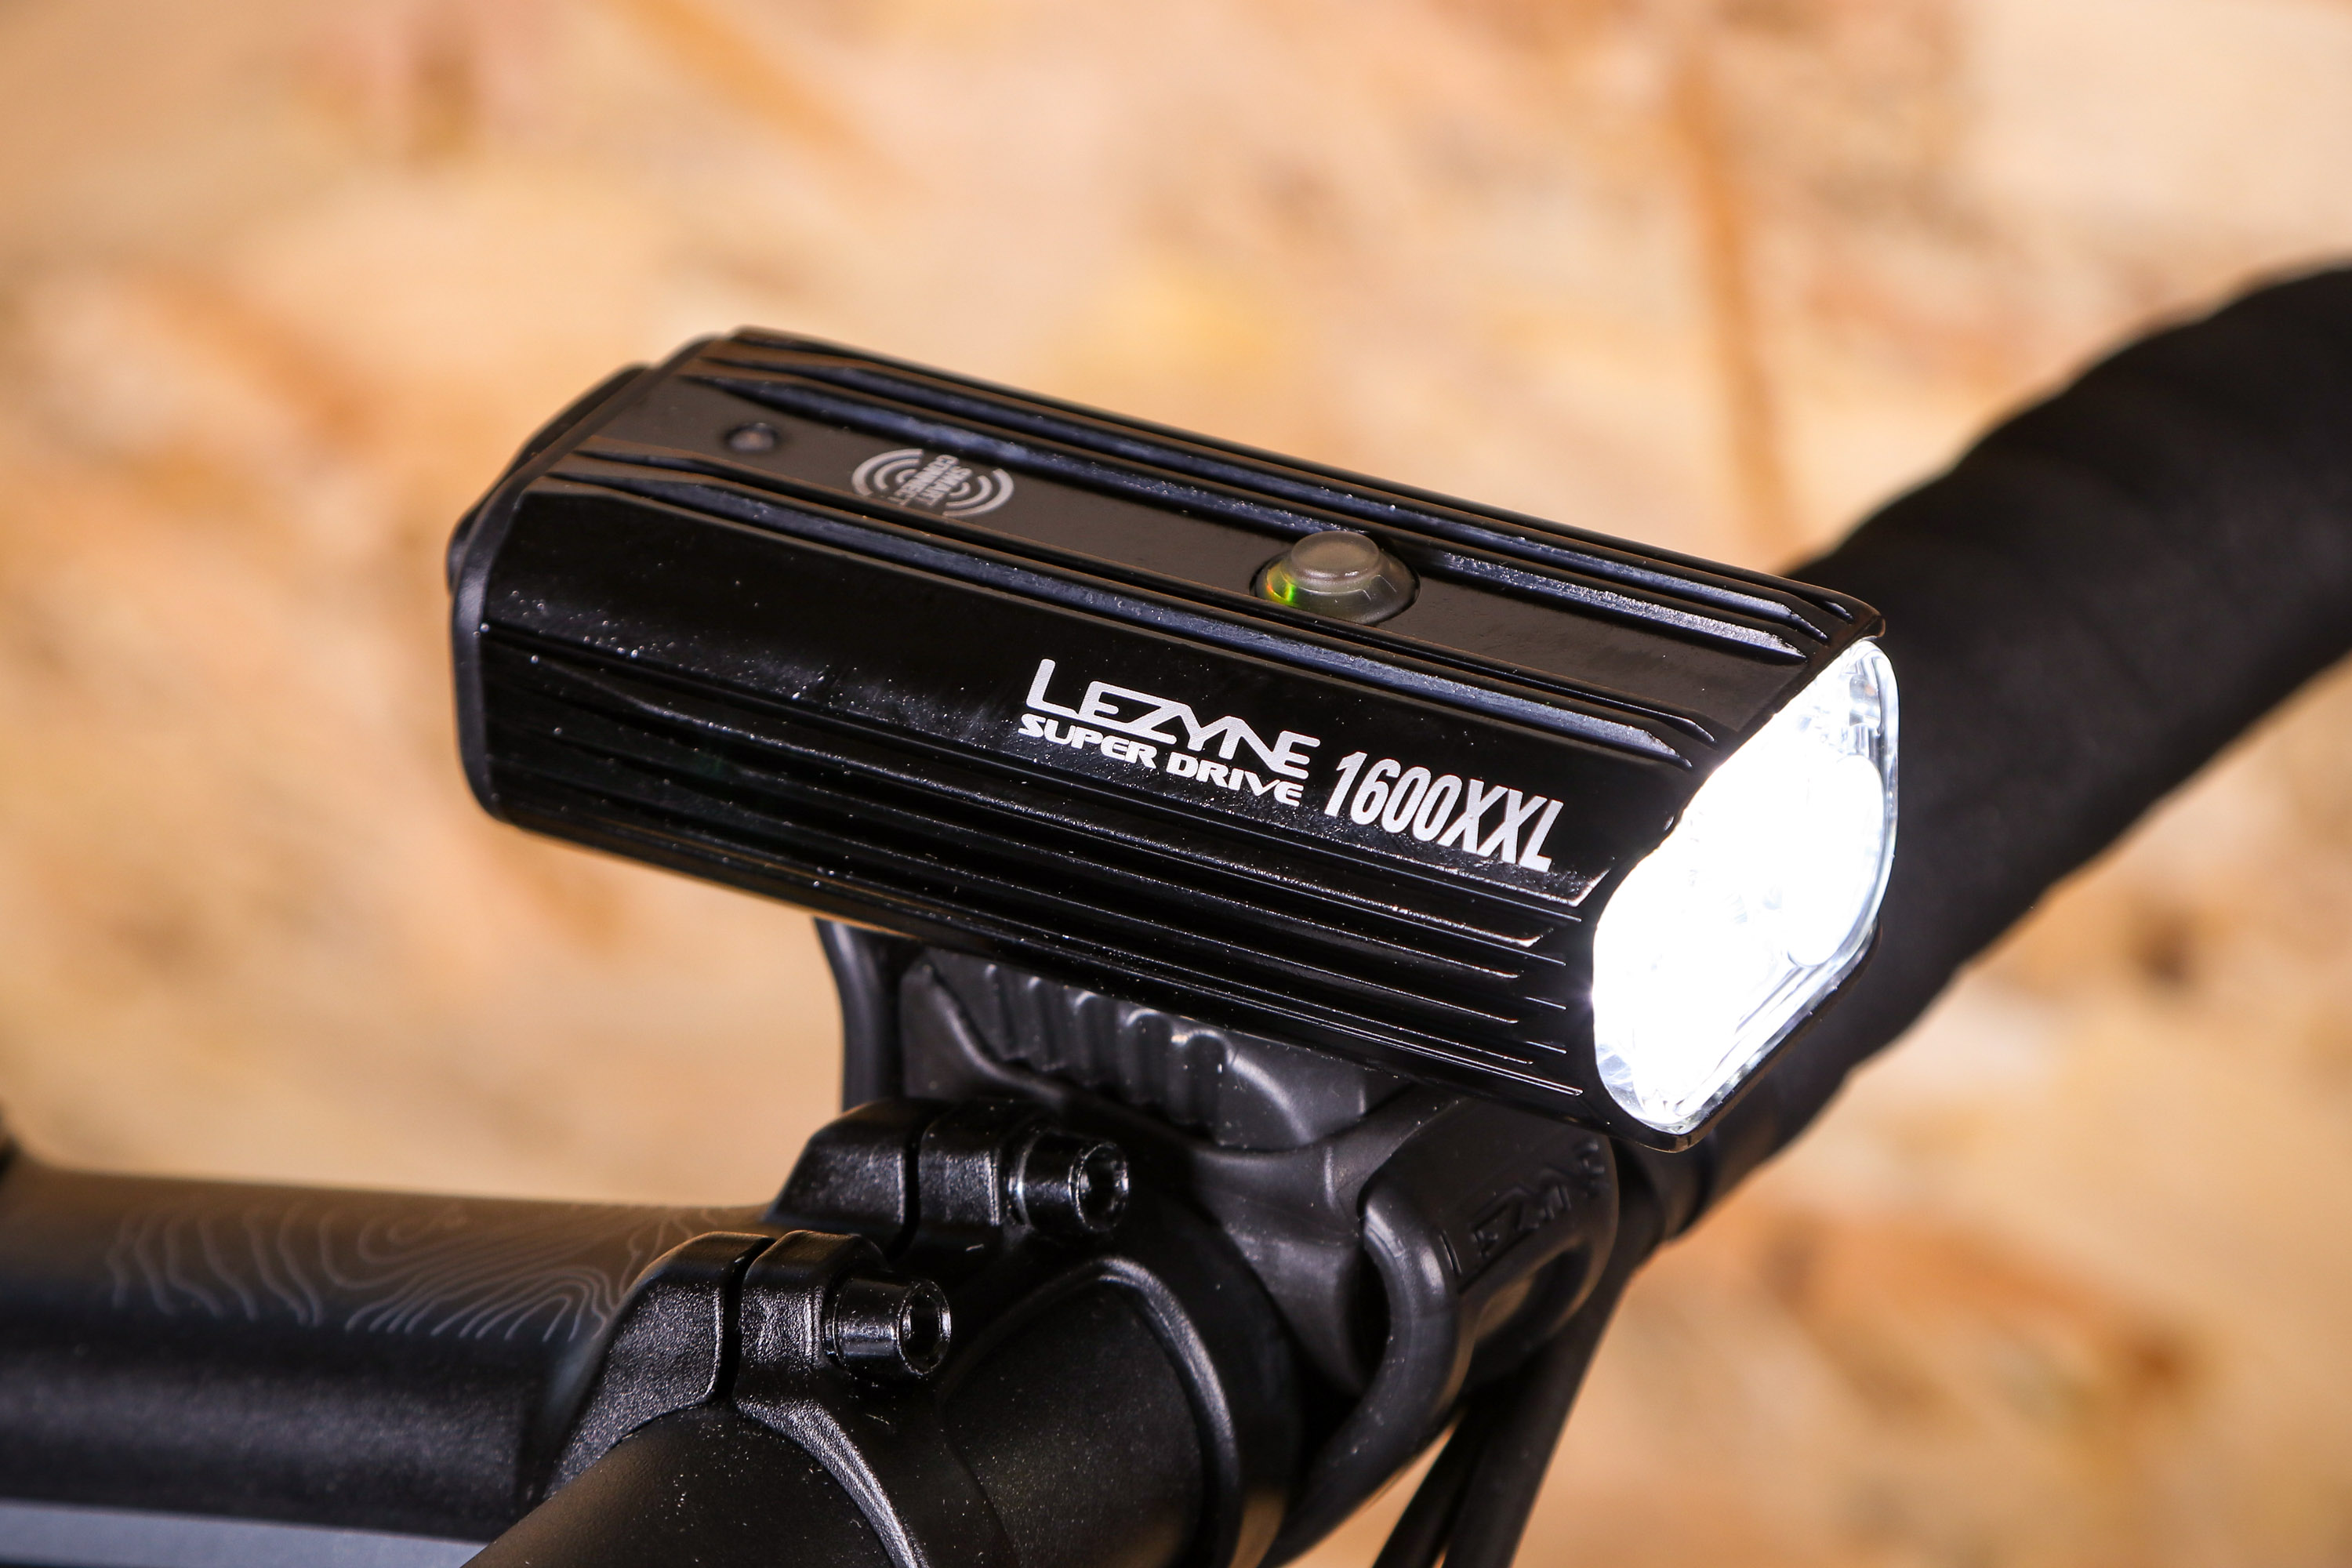 Lezyne Super Drive 1600XXL Bicycle Front Light